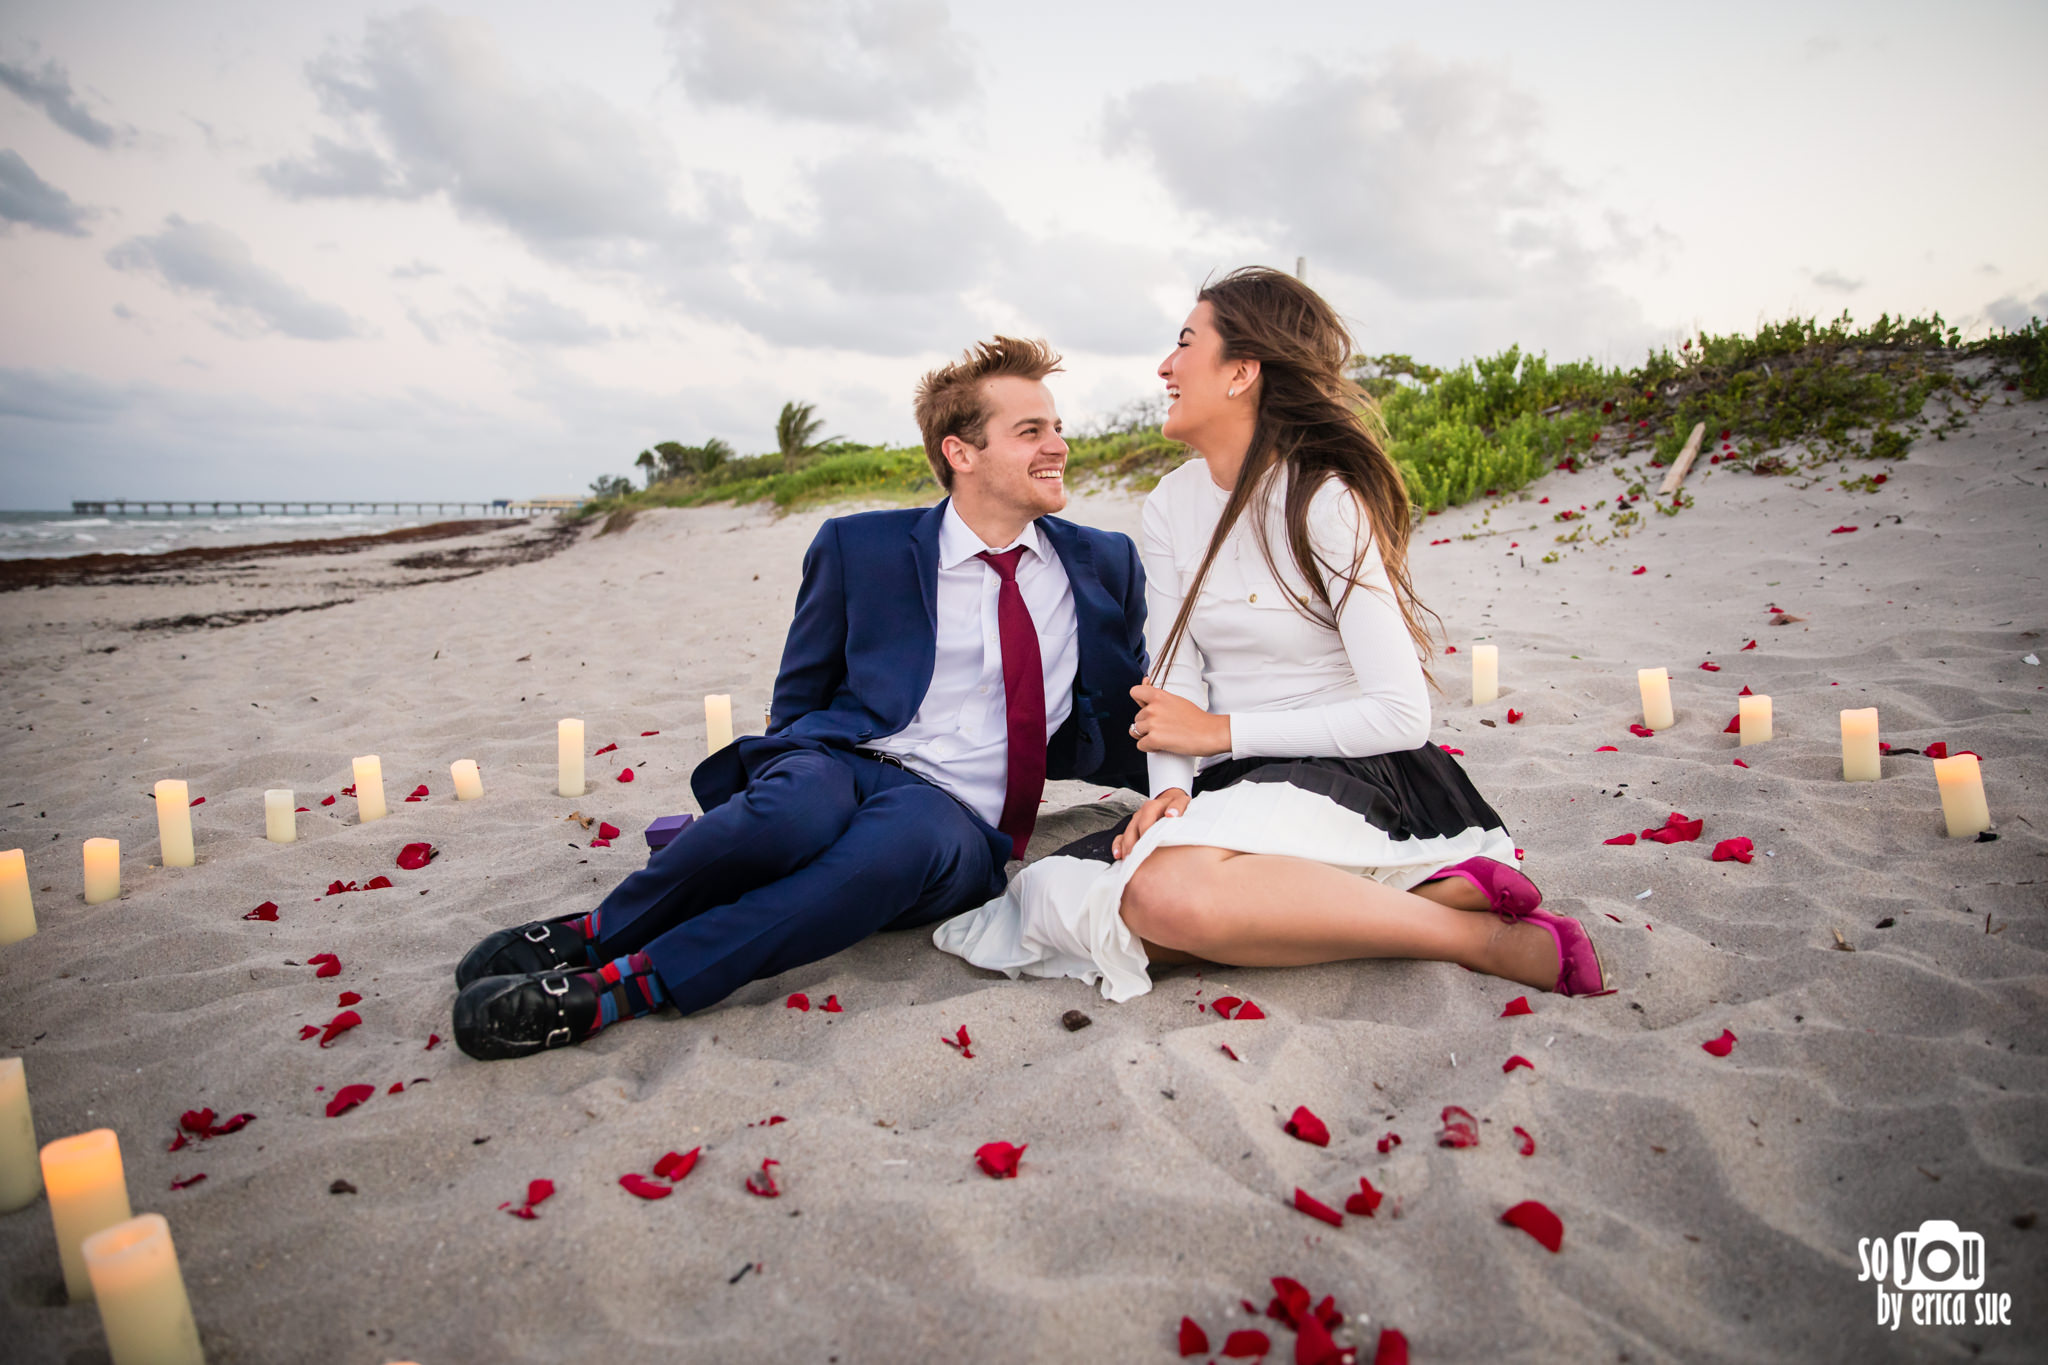 so-you-by-erica-sue-hollywood-fl-photographer-beach-engagement-flowers-candles-5090.jpg